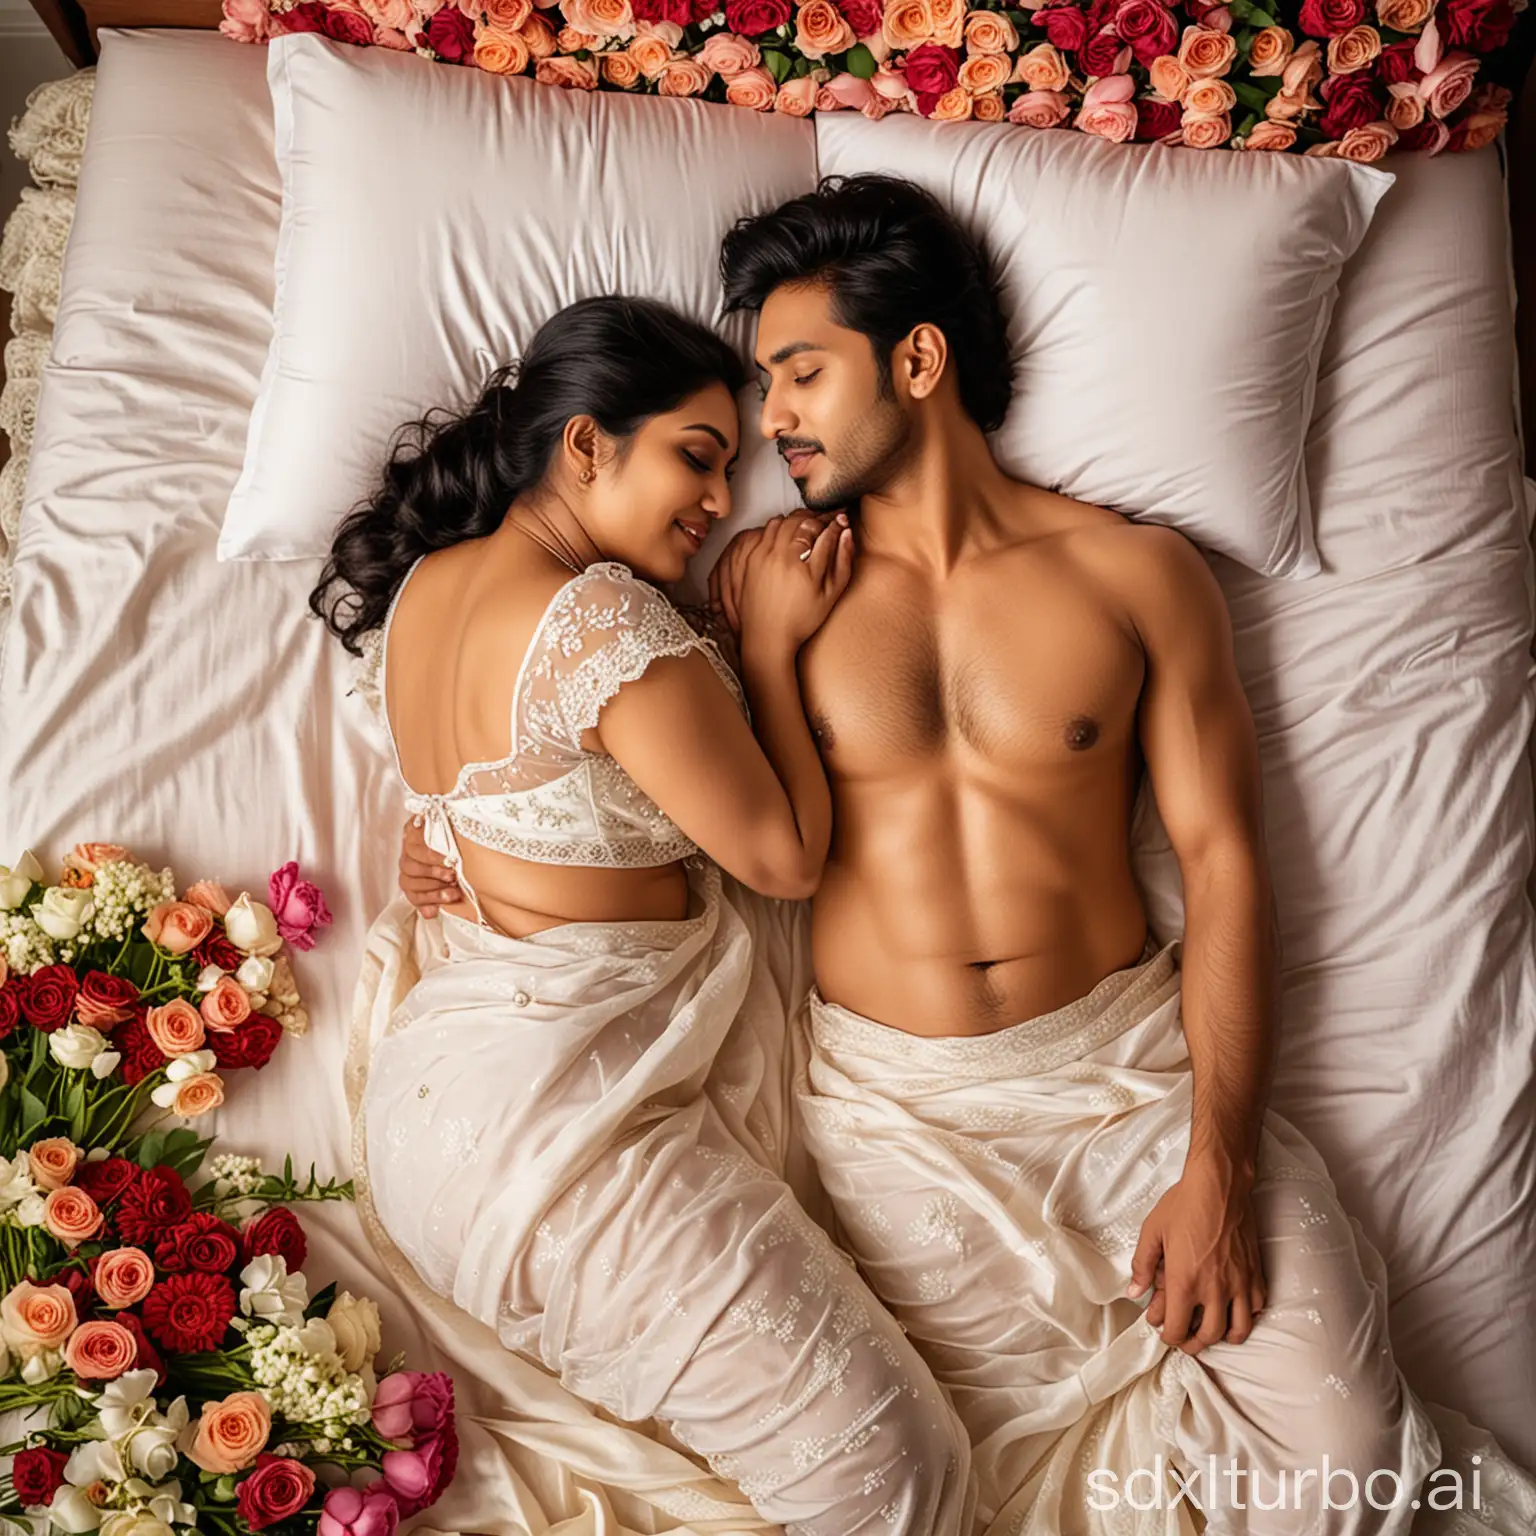 A young, attractive, romantic newlywed Indian Telugu couple is cuddling on the bed at night. The woman is thick, voluptuous, curvy, and very beautiful with fair skin, wearing a sheer chemise, lying next to a handsome man. After-sex look, top view, with flowers on the bed.